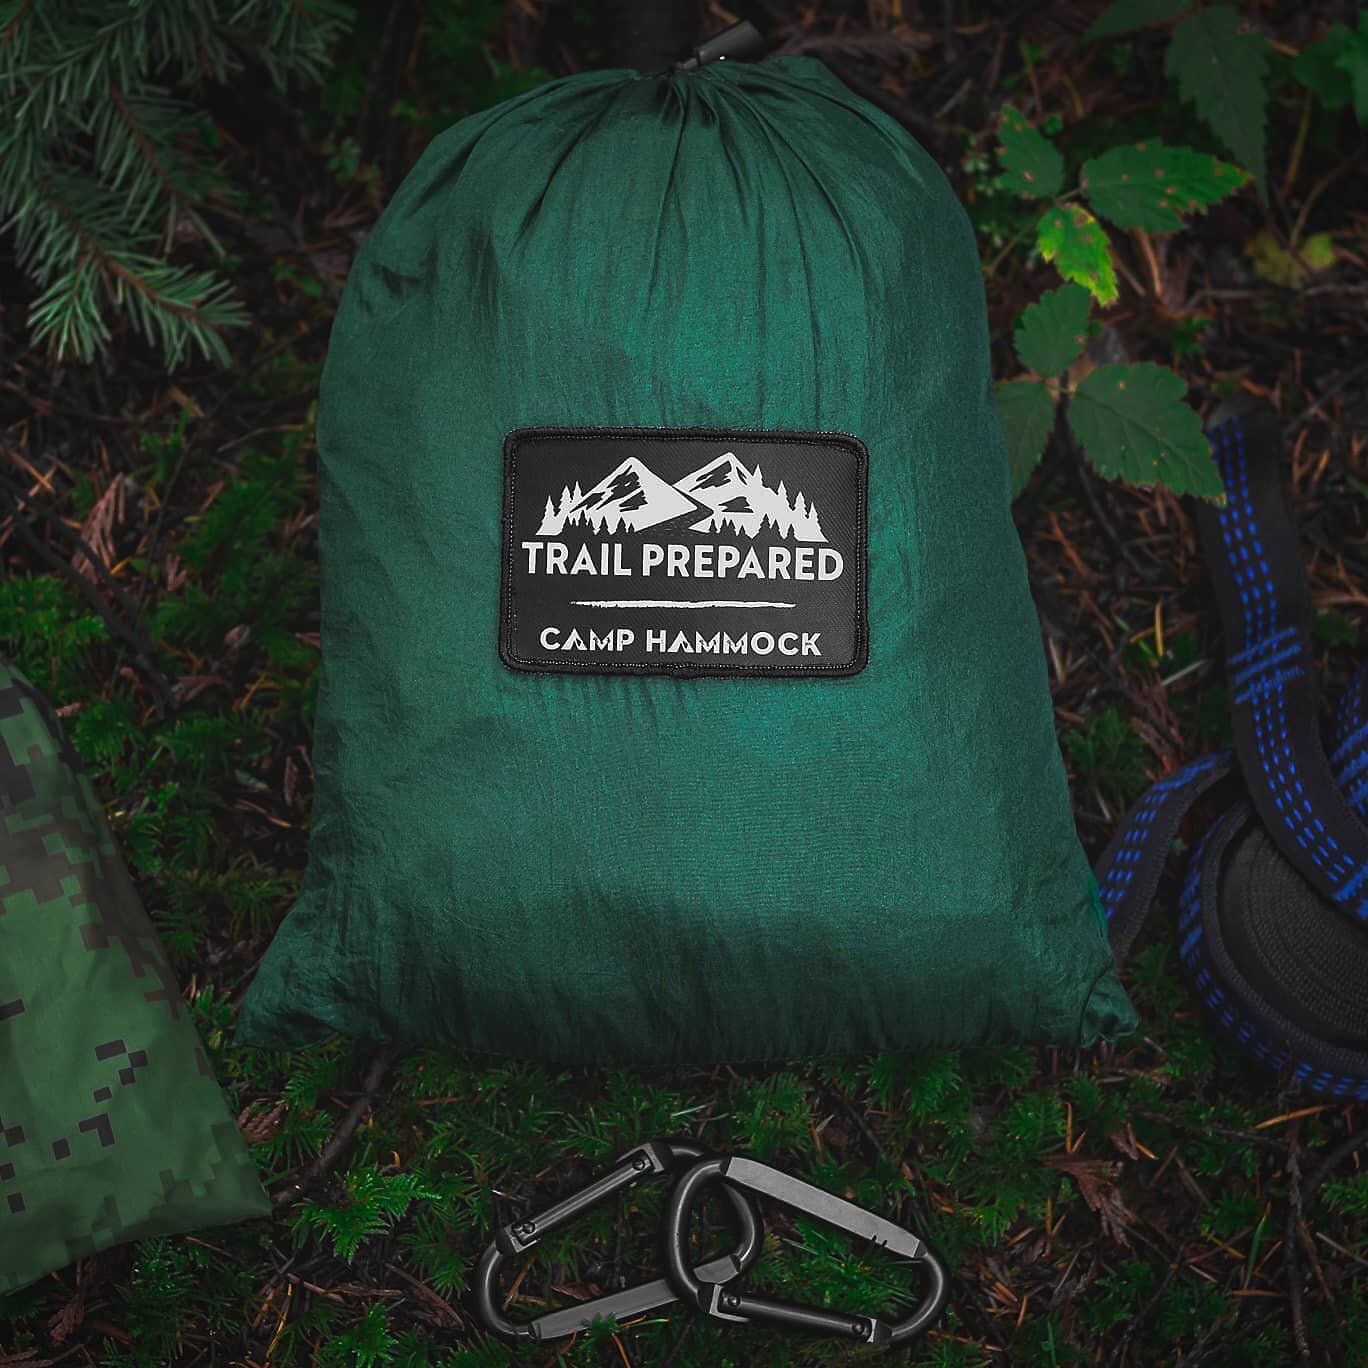 Before you head out for the weekend, make sure you check out our new Camp Hammock, with built-in mosquito net!🏕️ Includes everything you need to get that sublime hang.
-
-
-
-
-
#TrailPrepared #YouBelongOutdoors #CampHammock #Hammock #ParachuteHammo